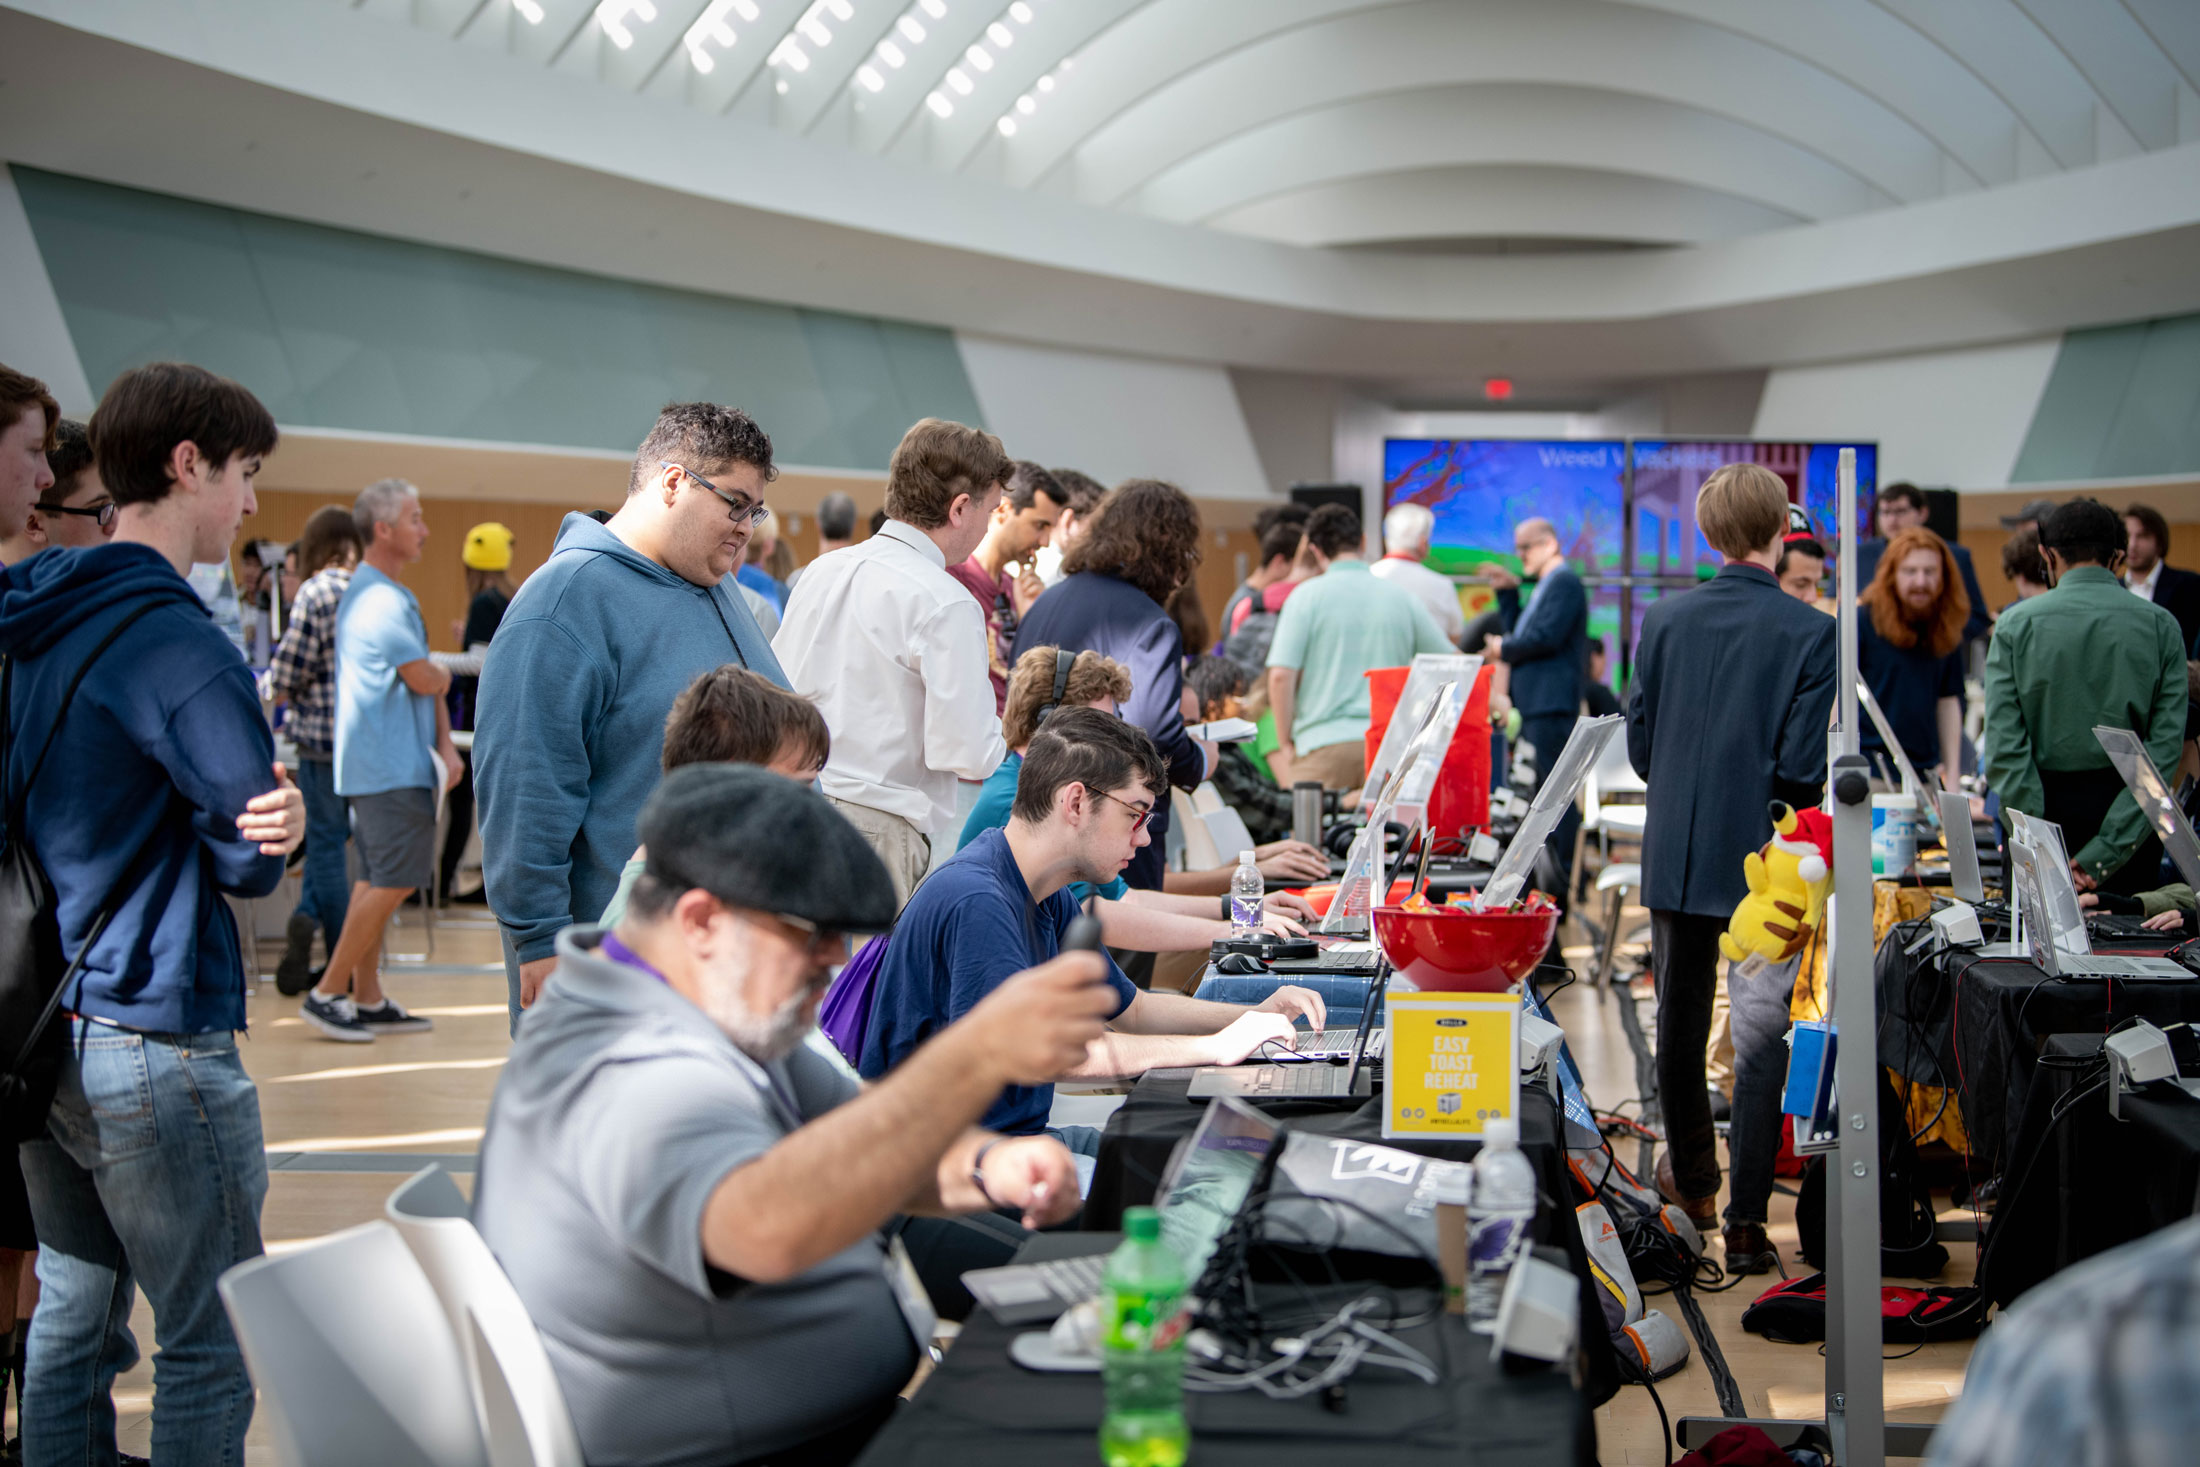 Students play video games at Fall Game Expo